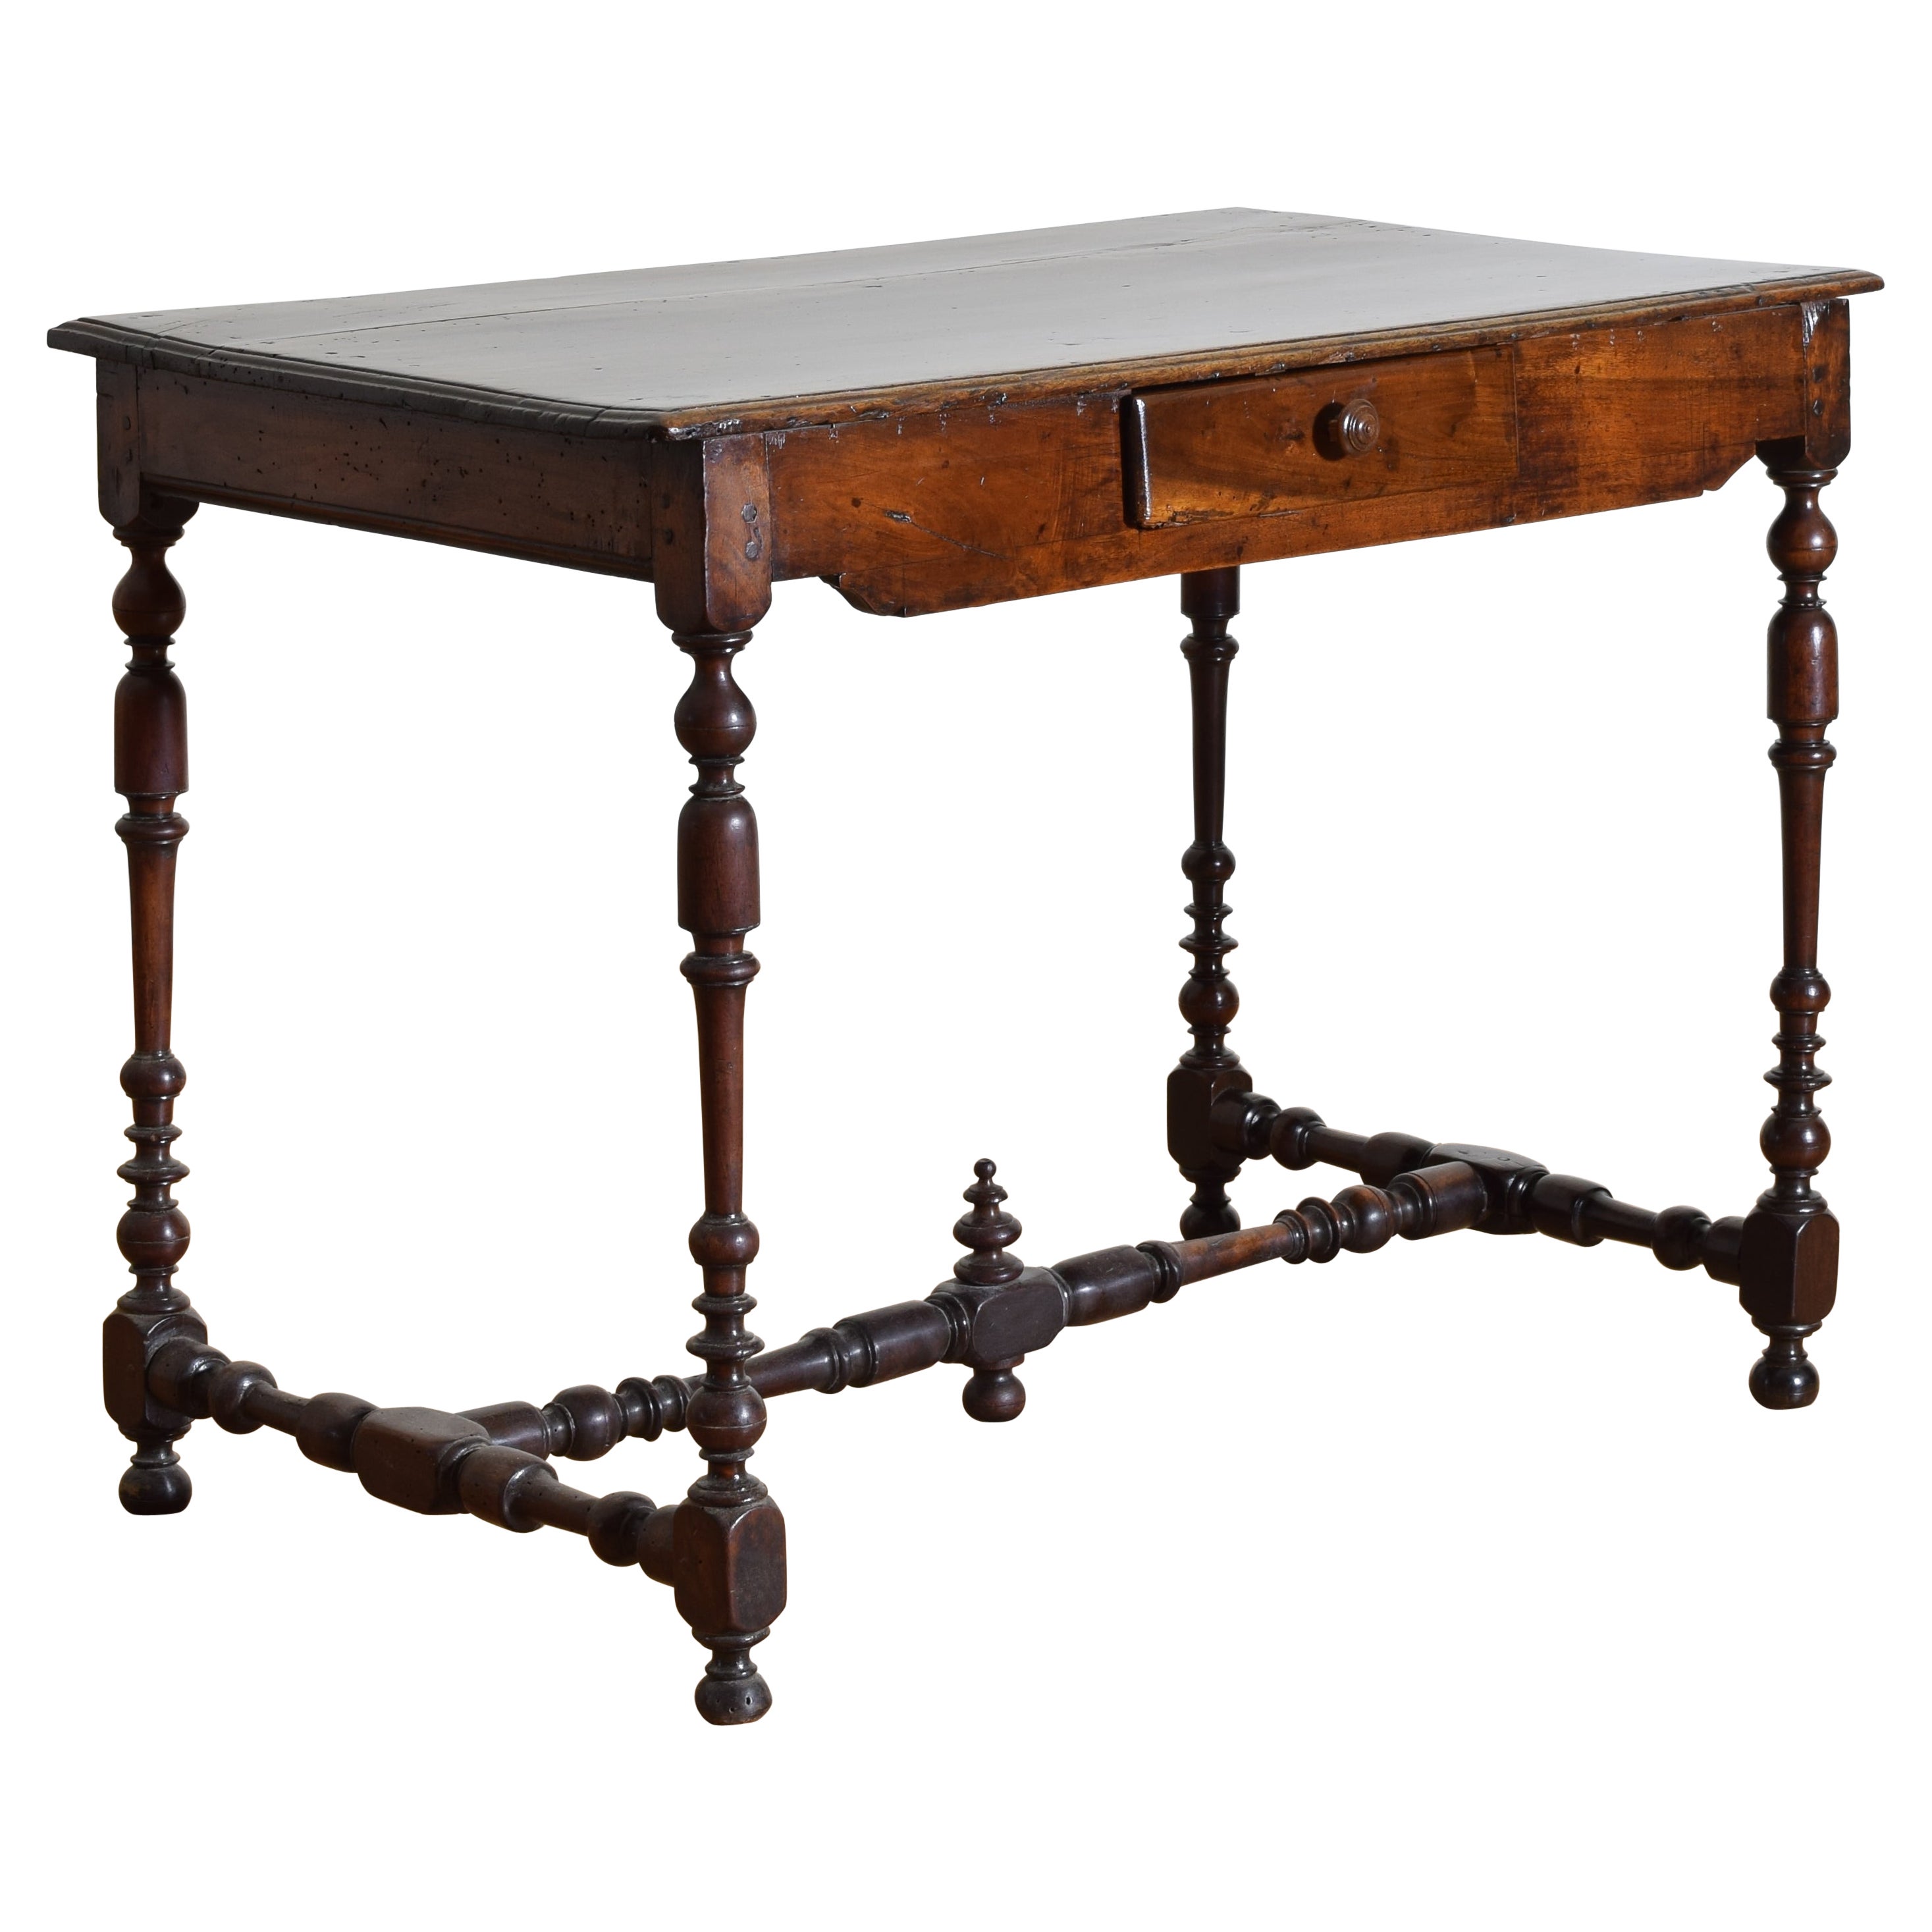 French Louis XIV Period Turned Walnut 1-Drawer Table, 1st quarter 18th century For Sale